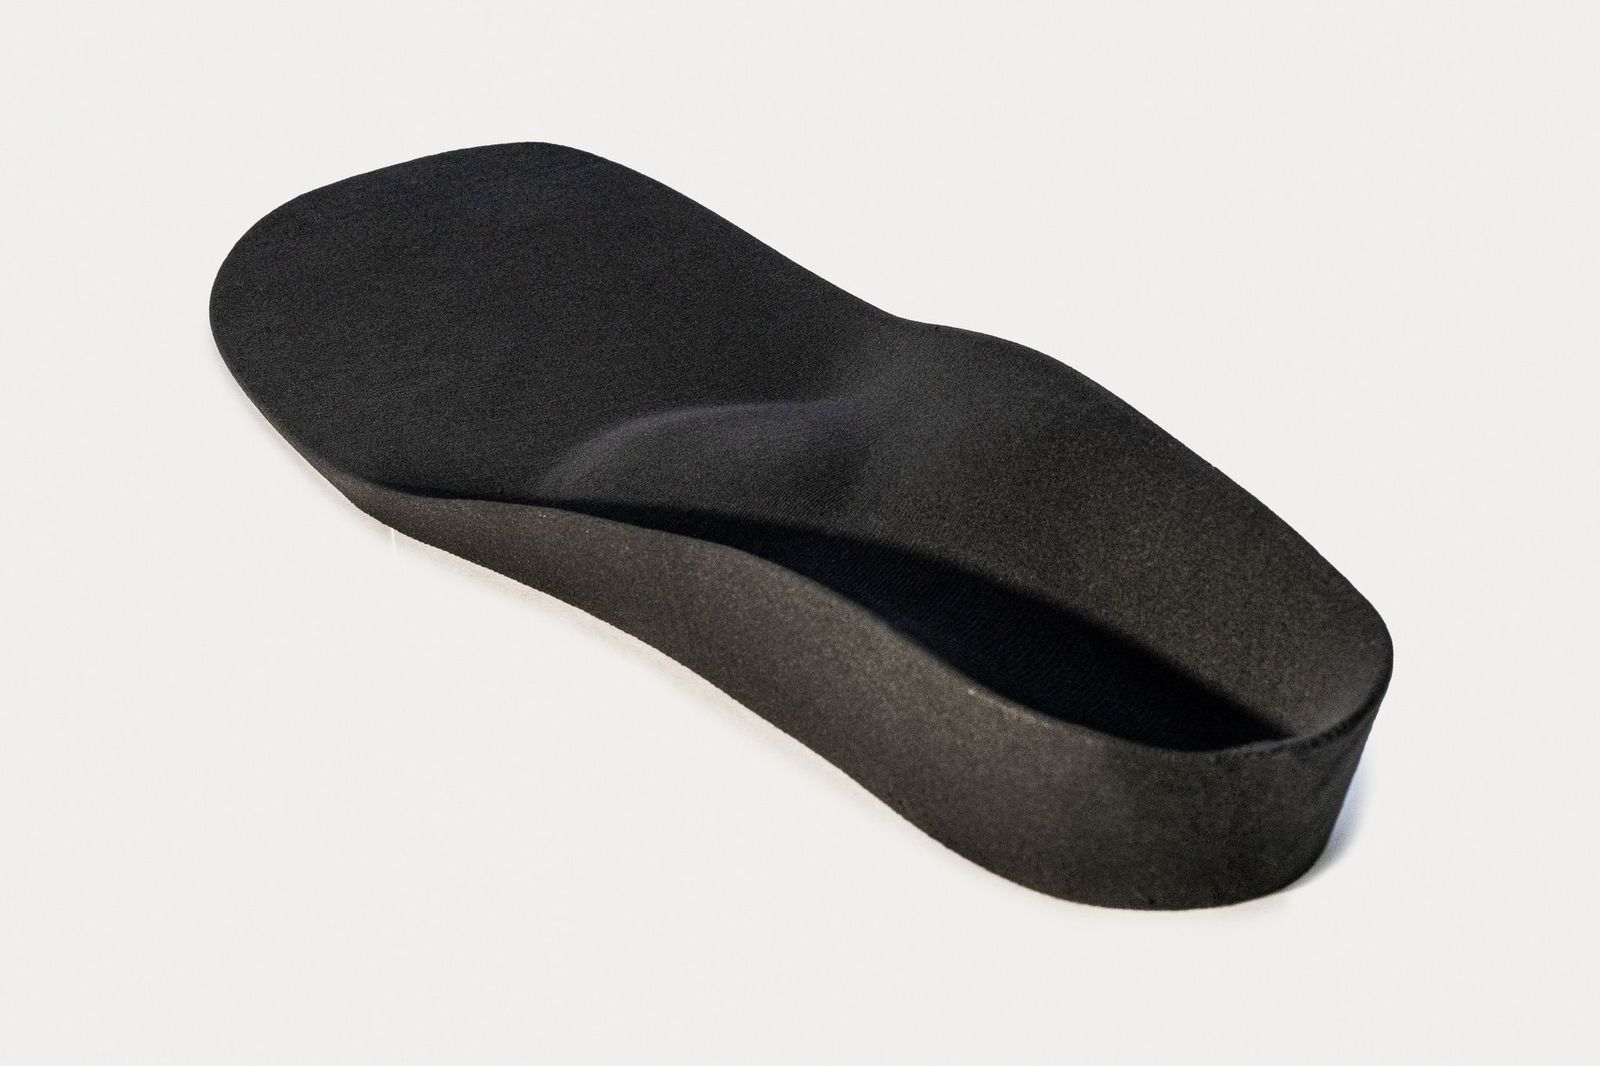 printed insole from top angle showing its shape with heightening and deepening